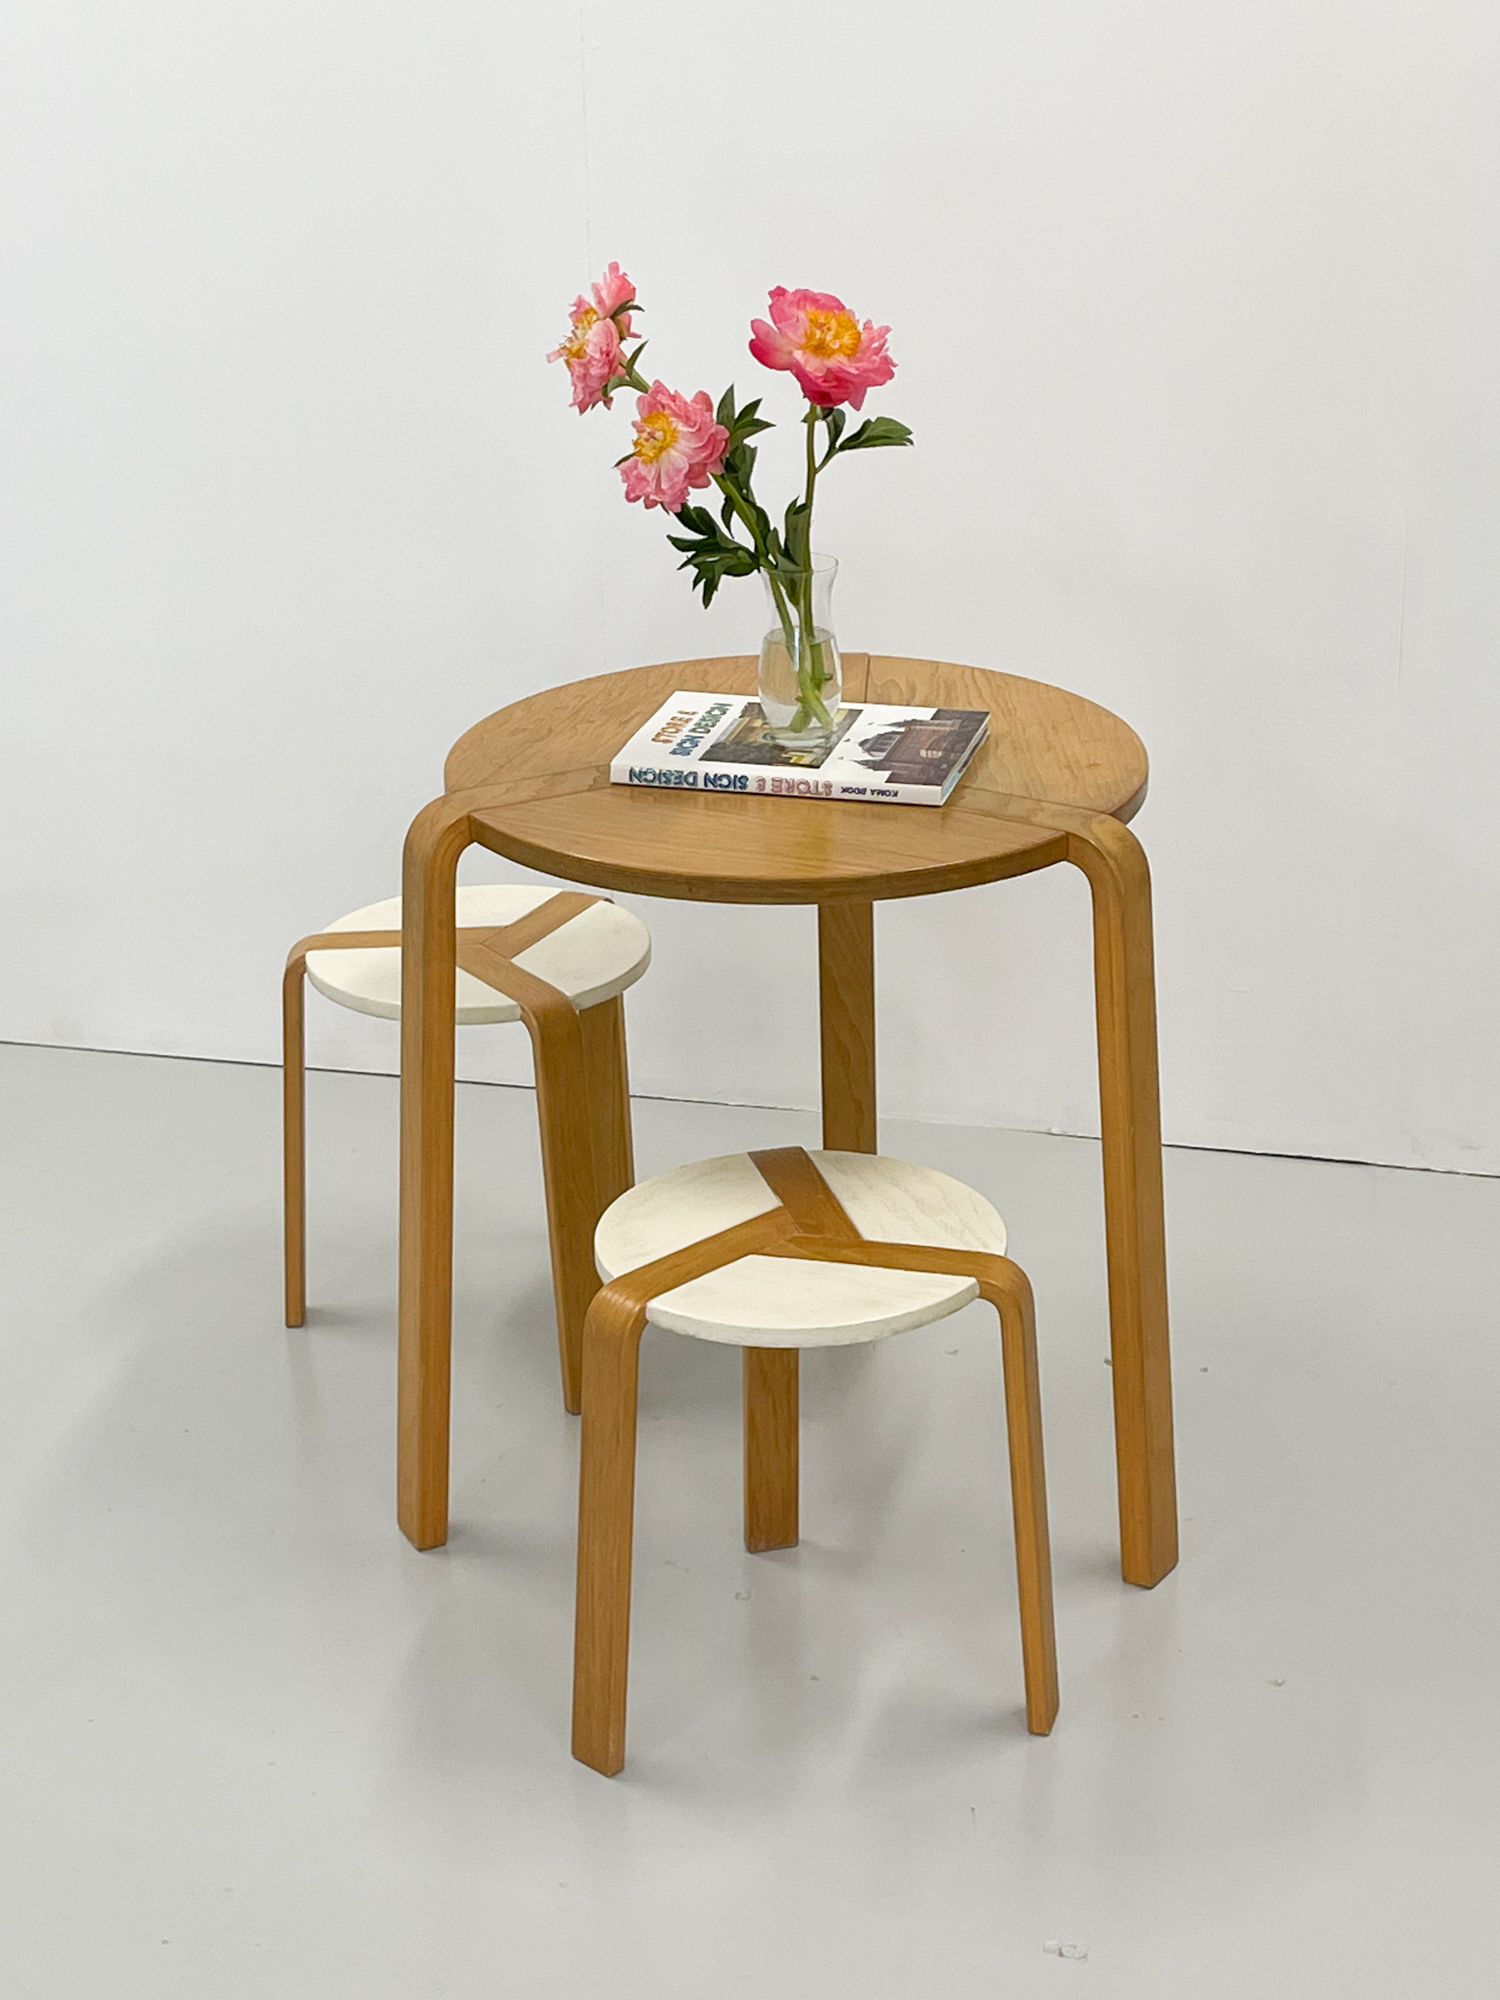 1970s Birch Jocker Table and Stools by A. Simonit & G. Del Piero for Olivo Srl